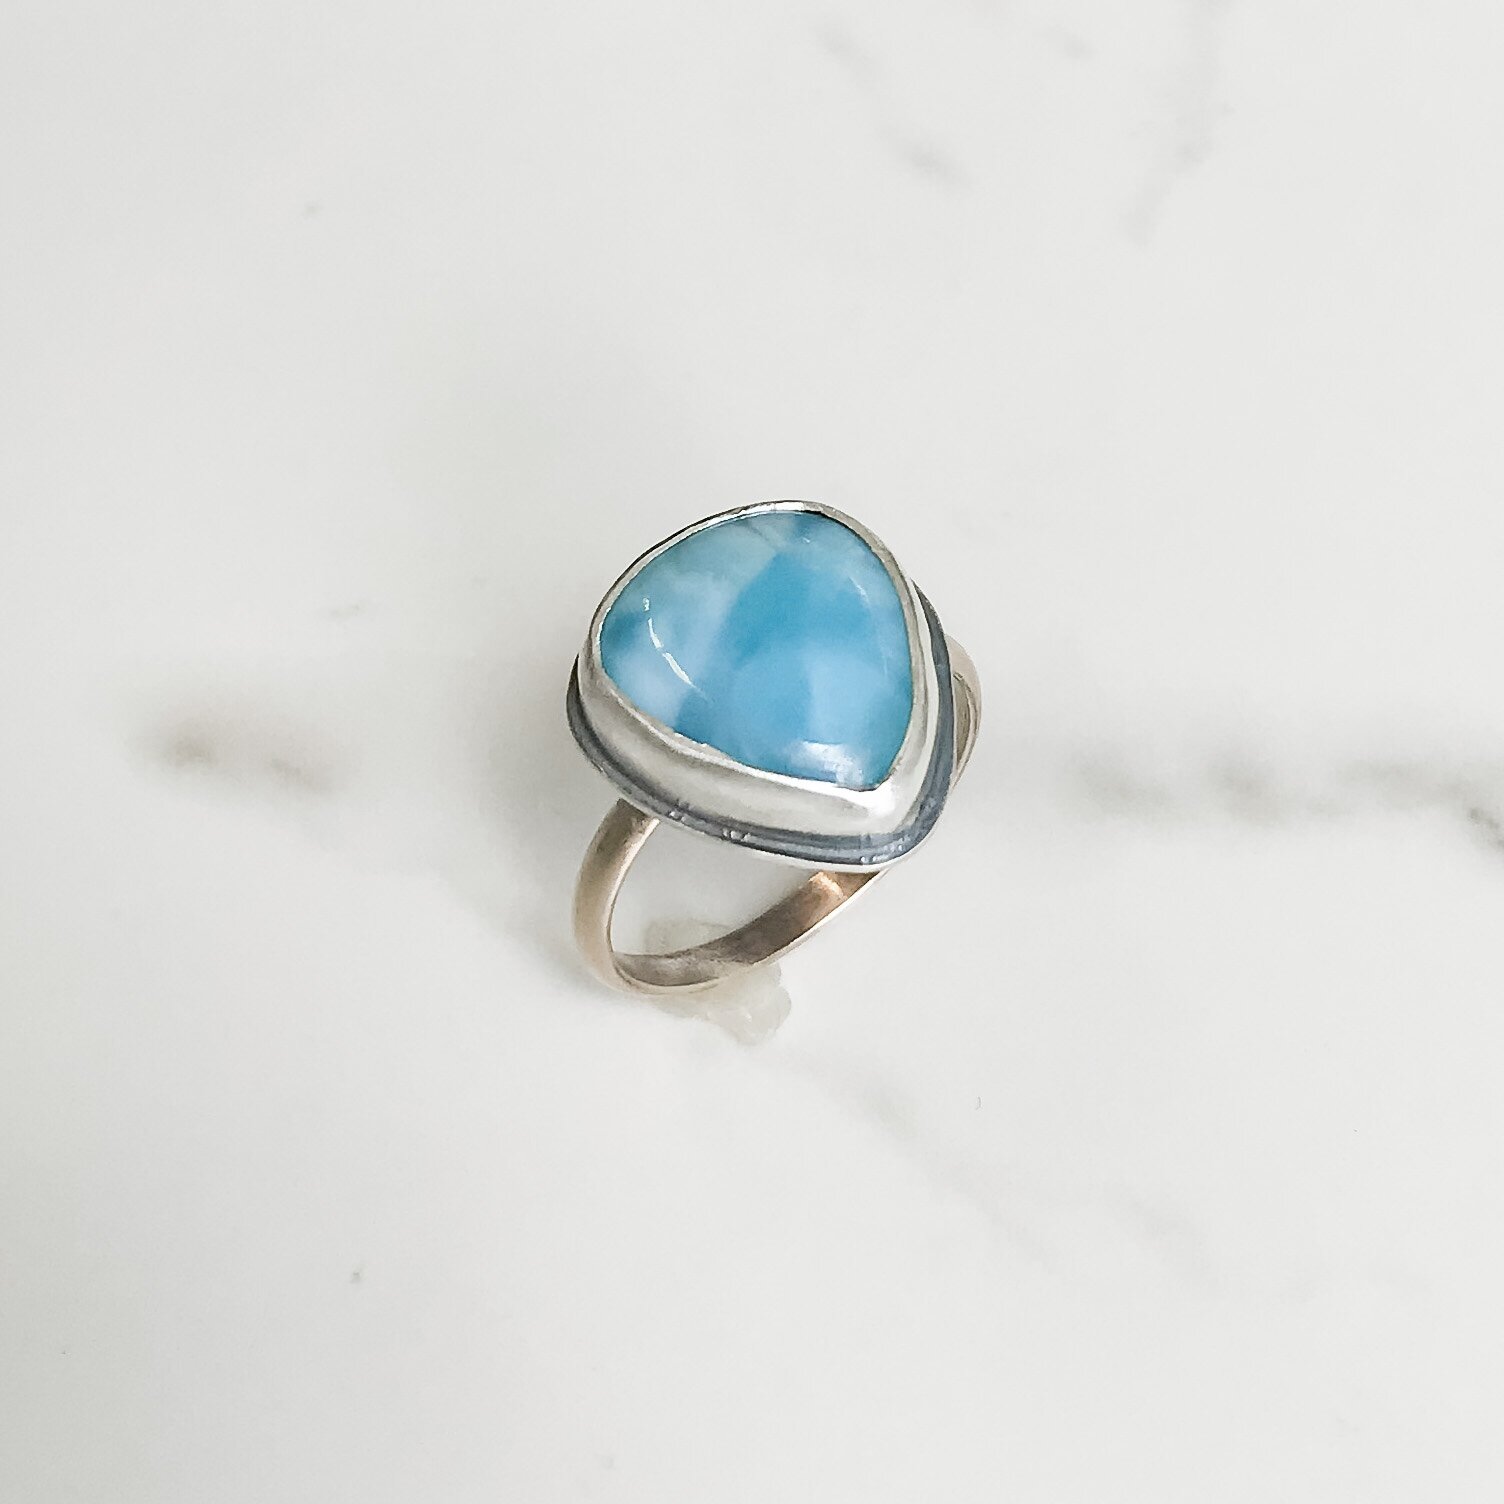 Angelite Sterling Silver Ring Size 8.5 Nothing But Blue Skies